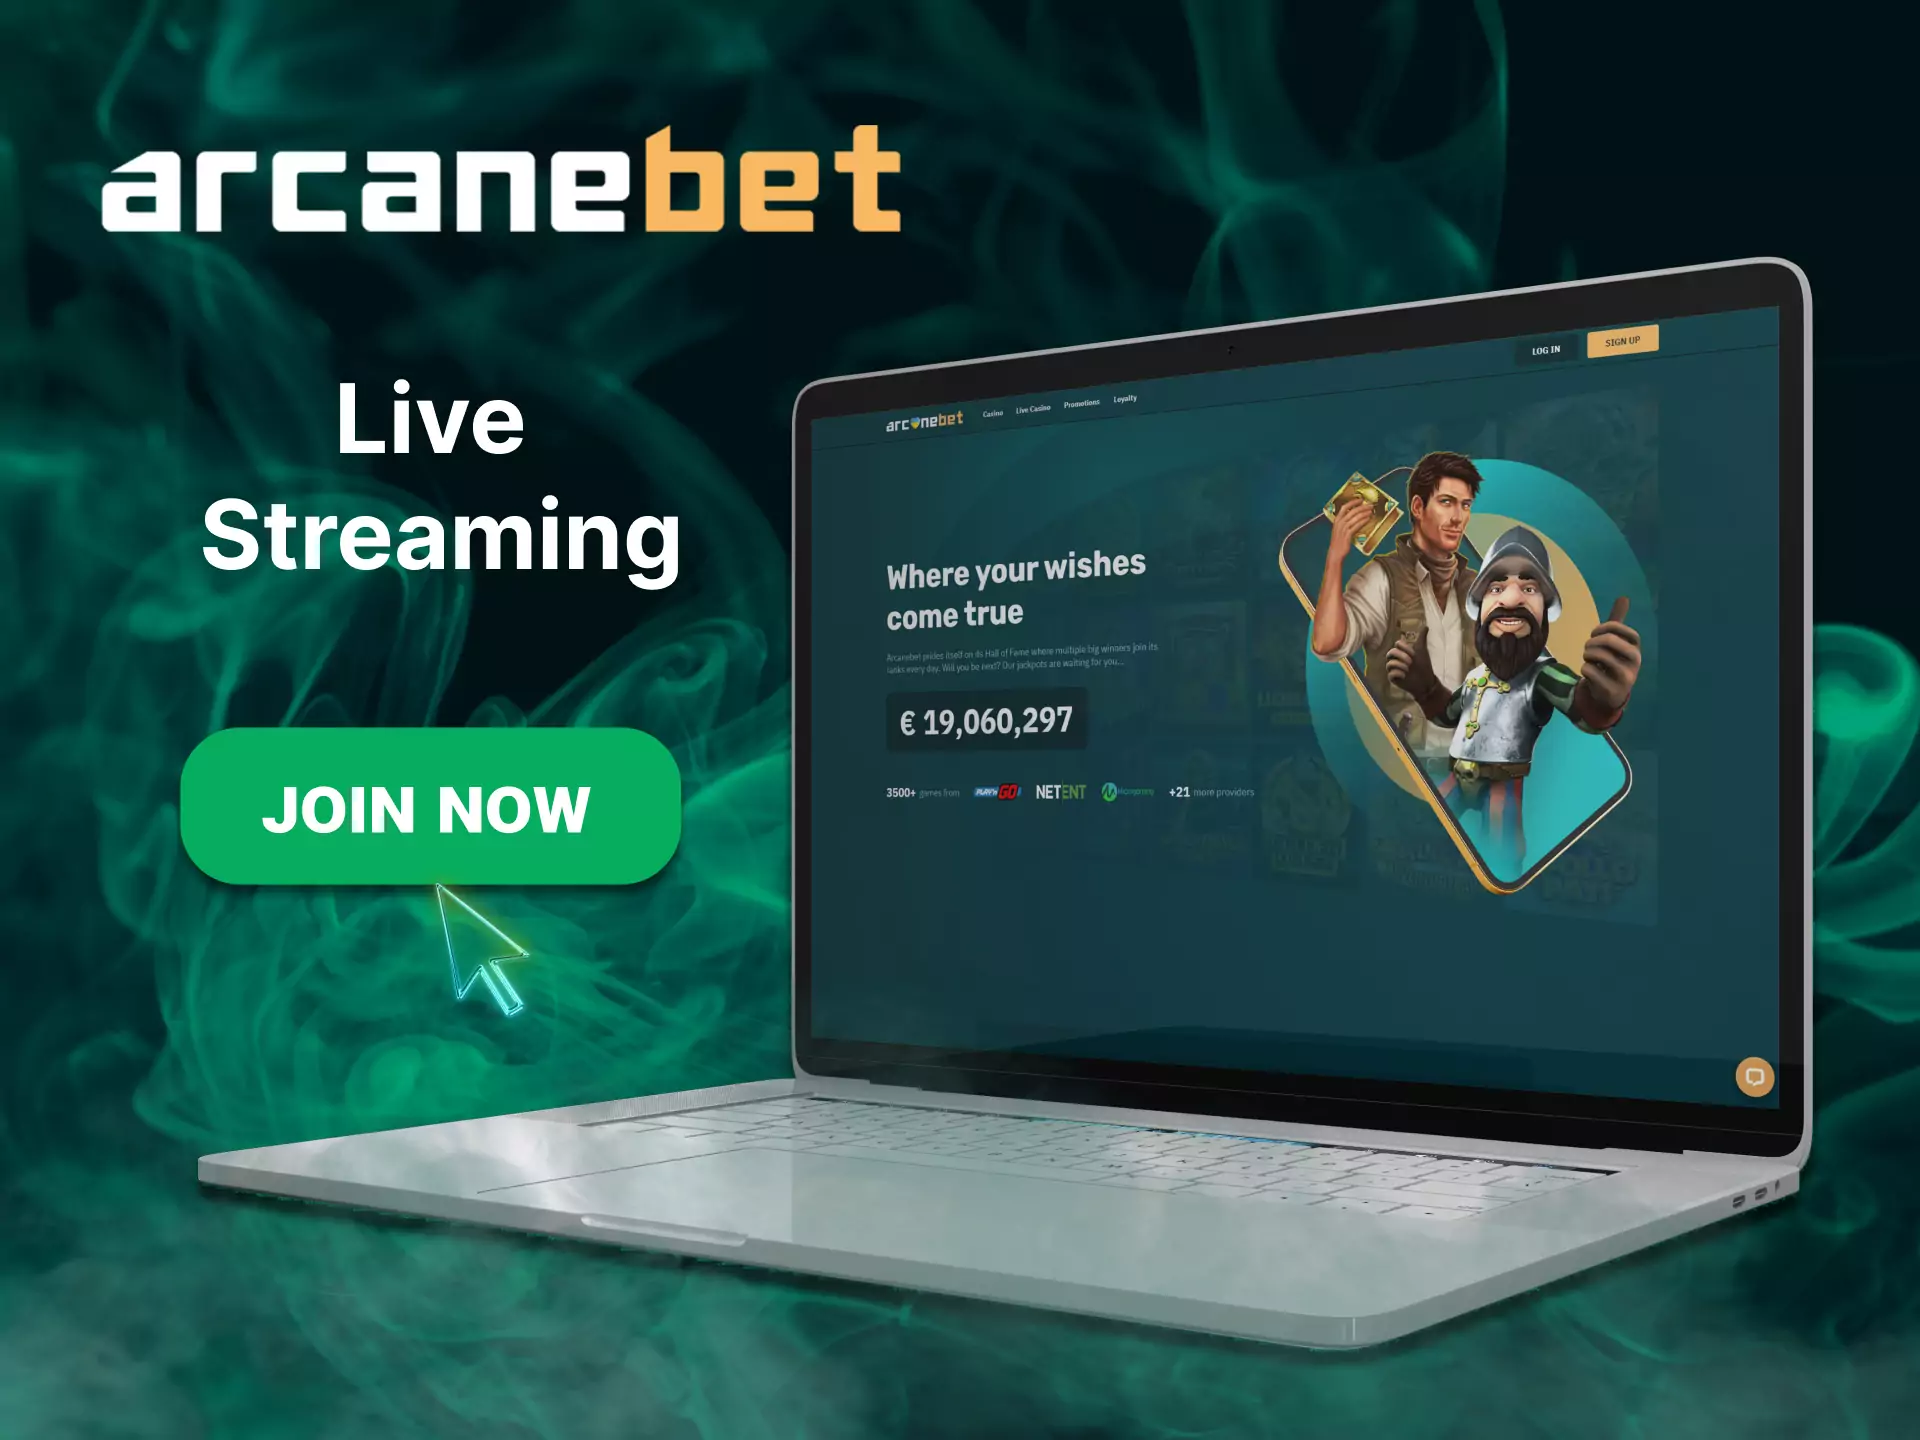 Follow important sports events live streaming with Arcanebet.